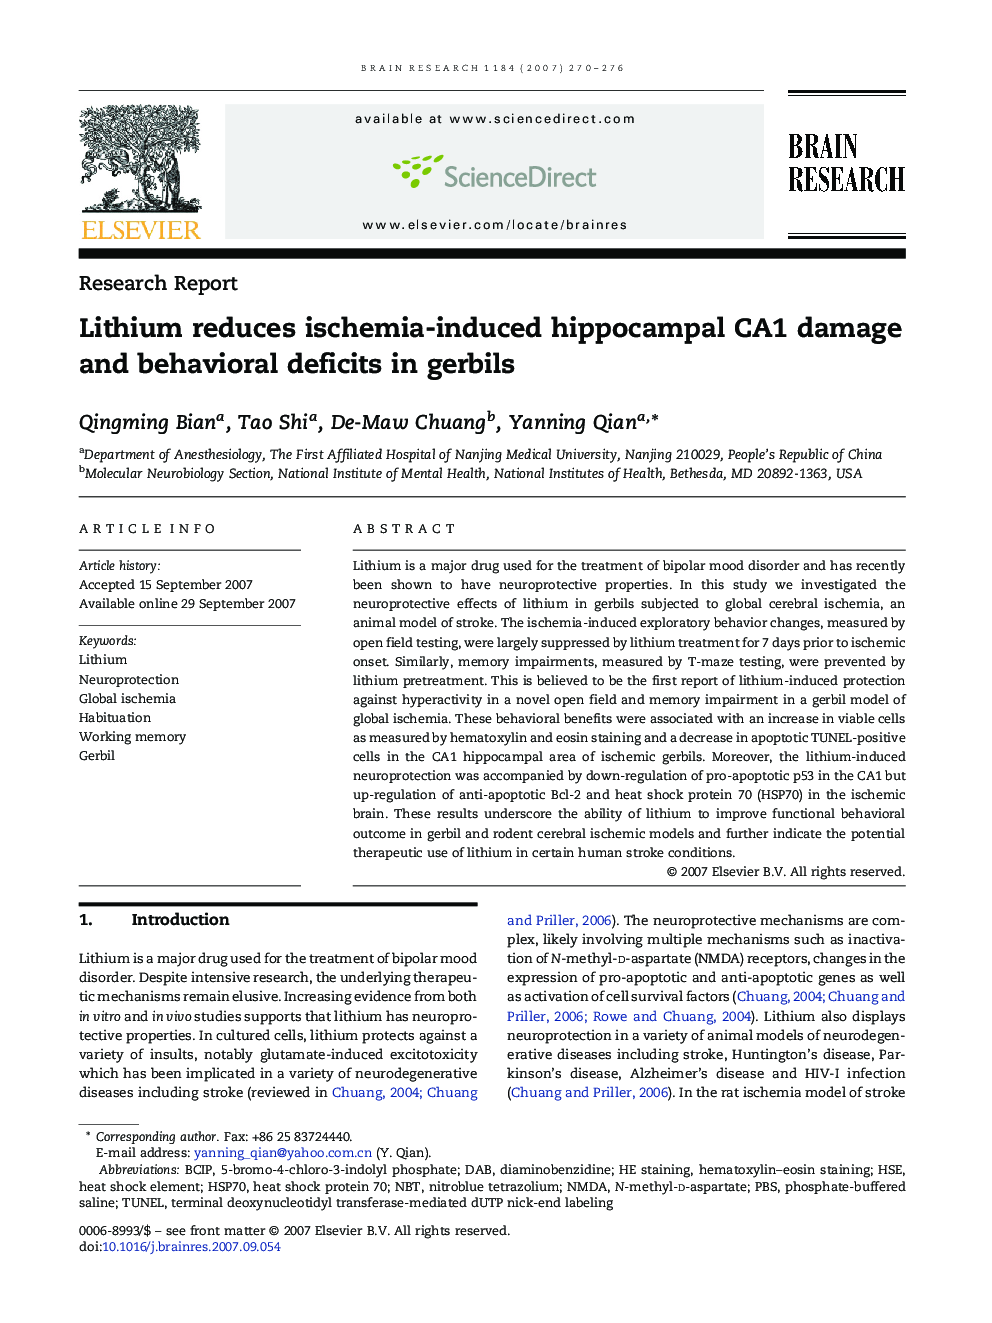 Lithium reduces ischemia-induced hippocampal CA1 damage and behavioral deficits in gerbils